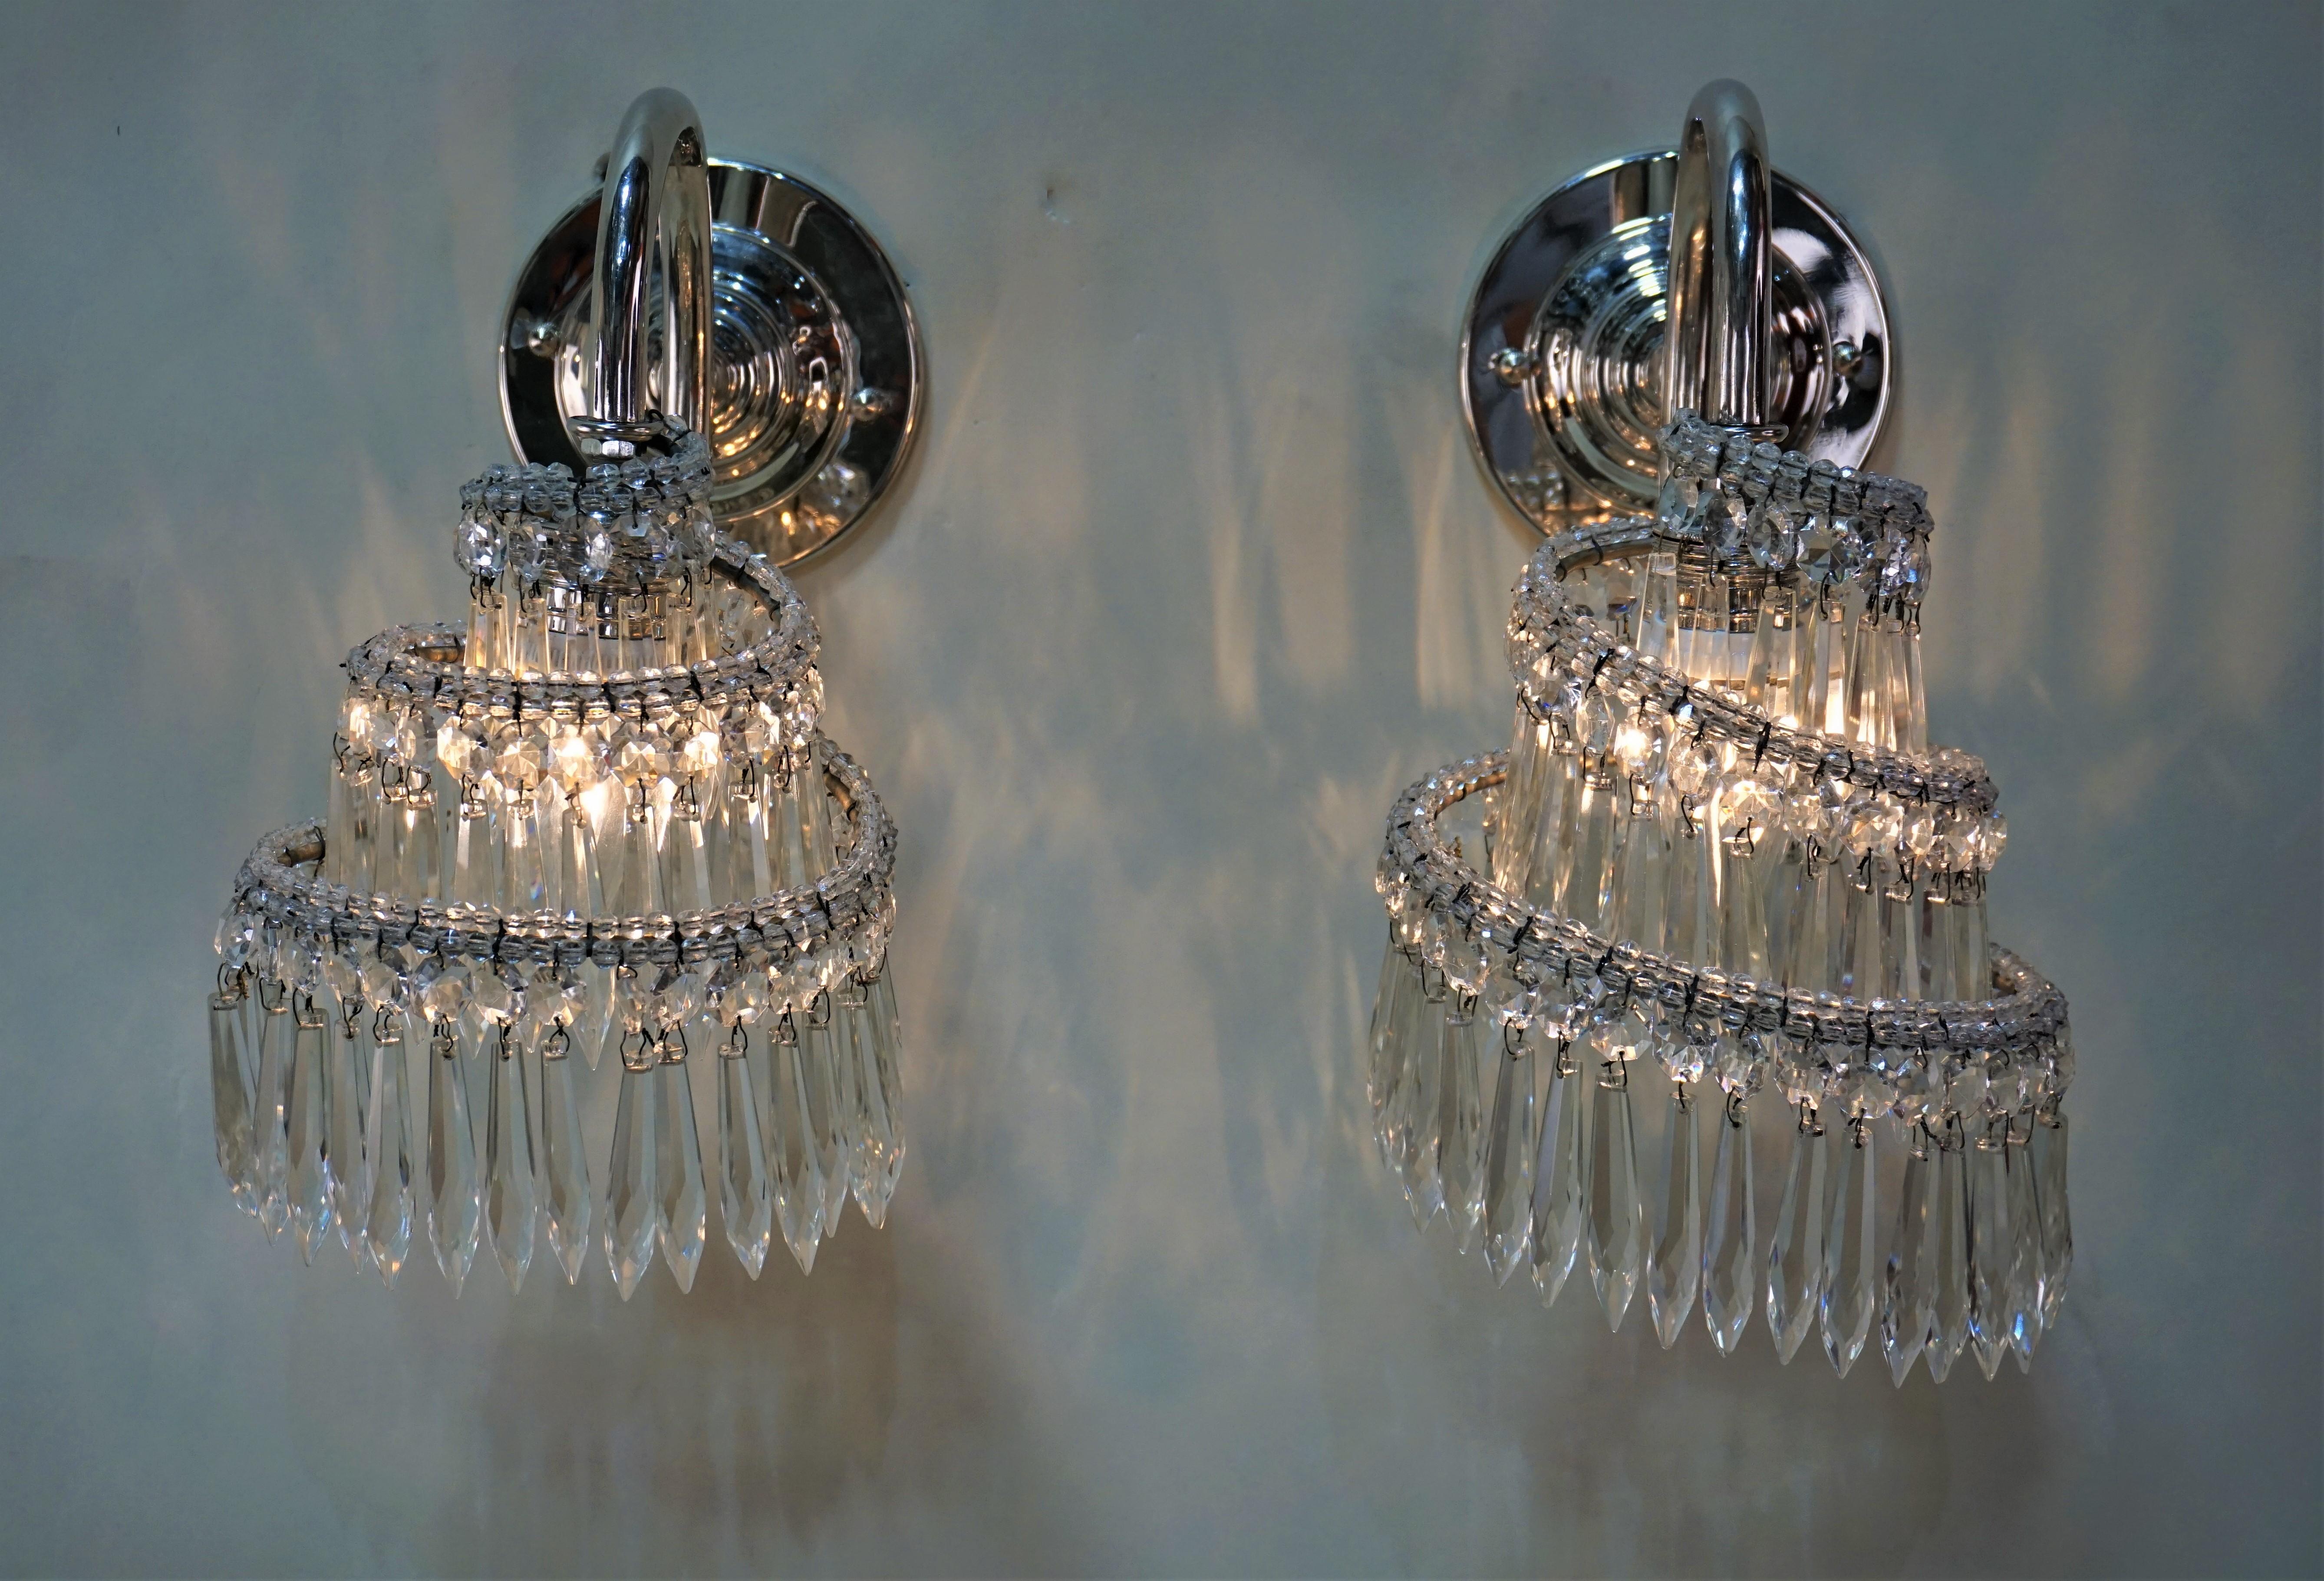 Swivel design crystal covering the light with nickel on bronze pair of wall sconces.